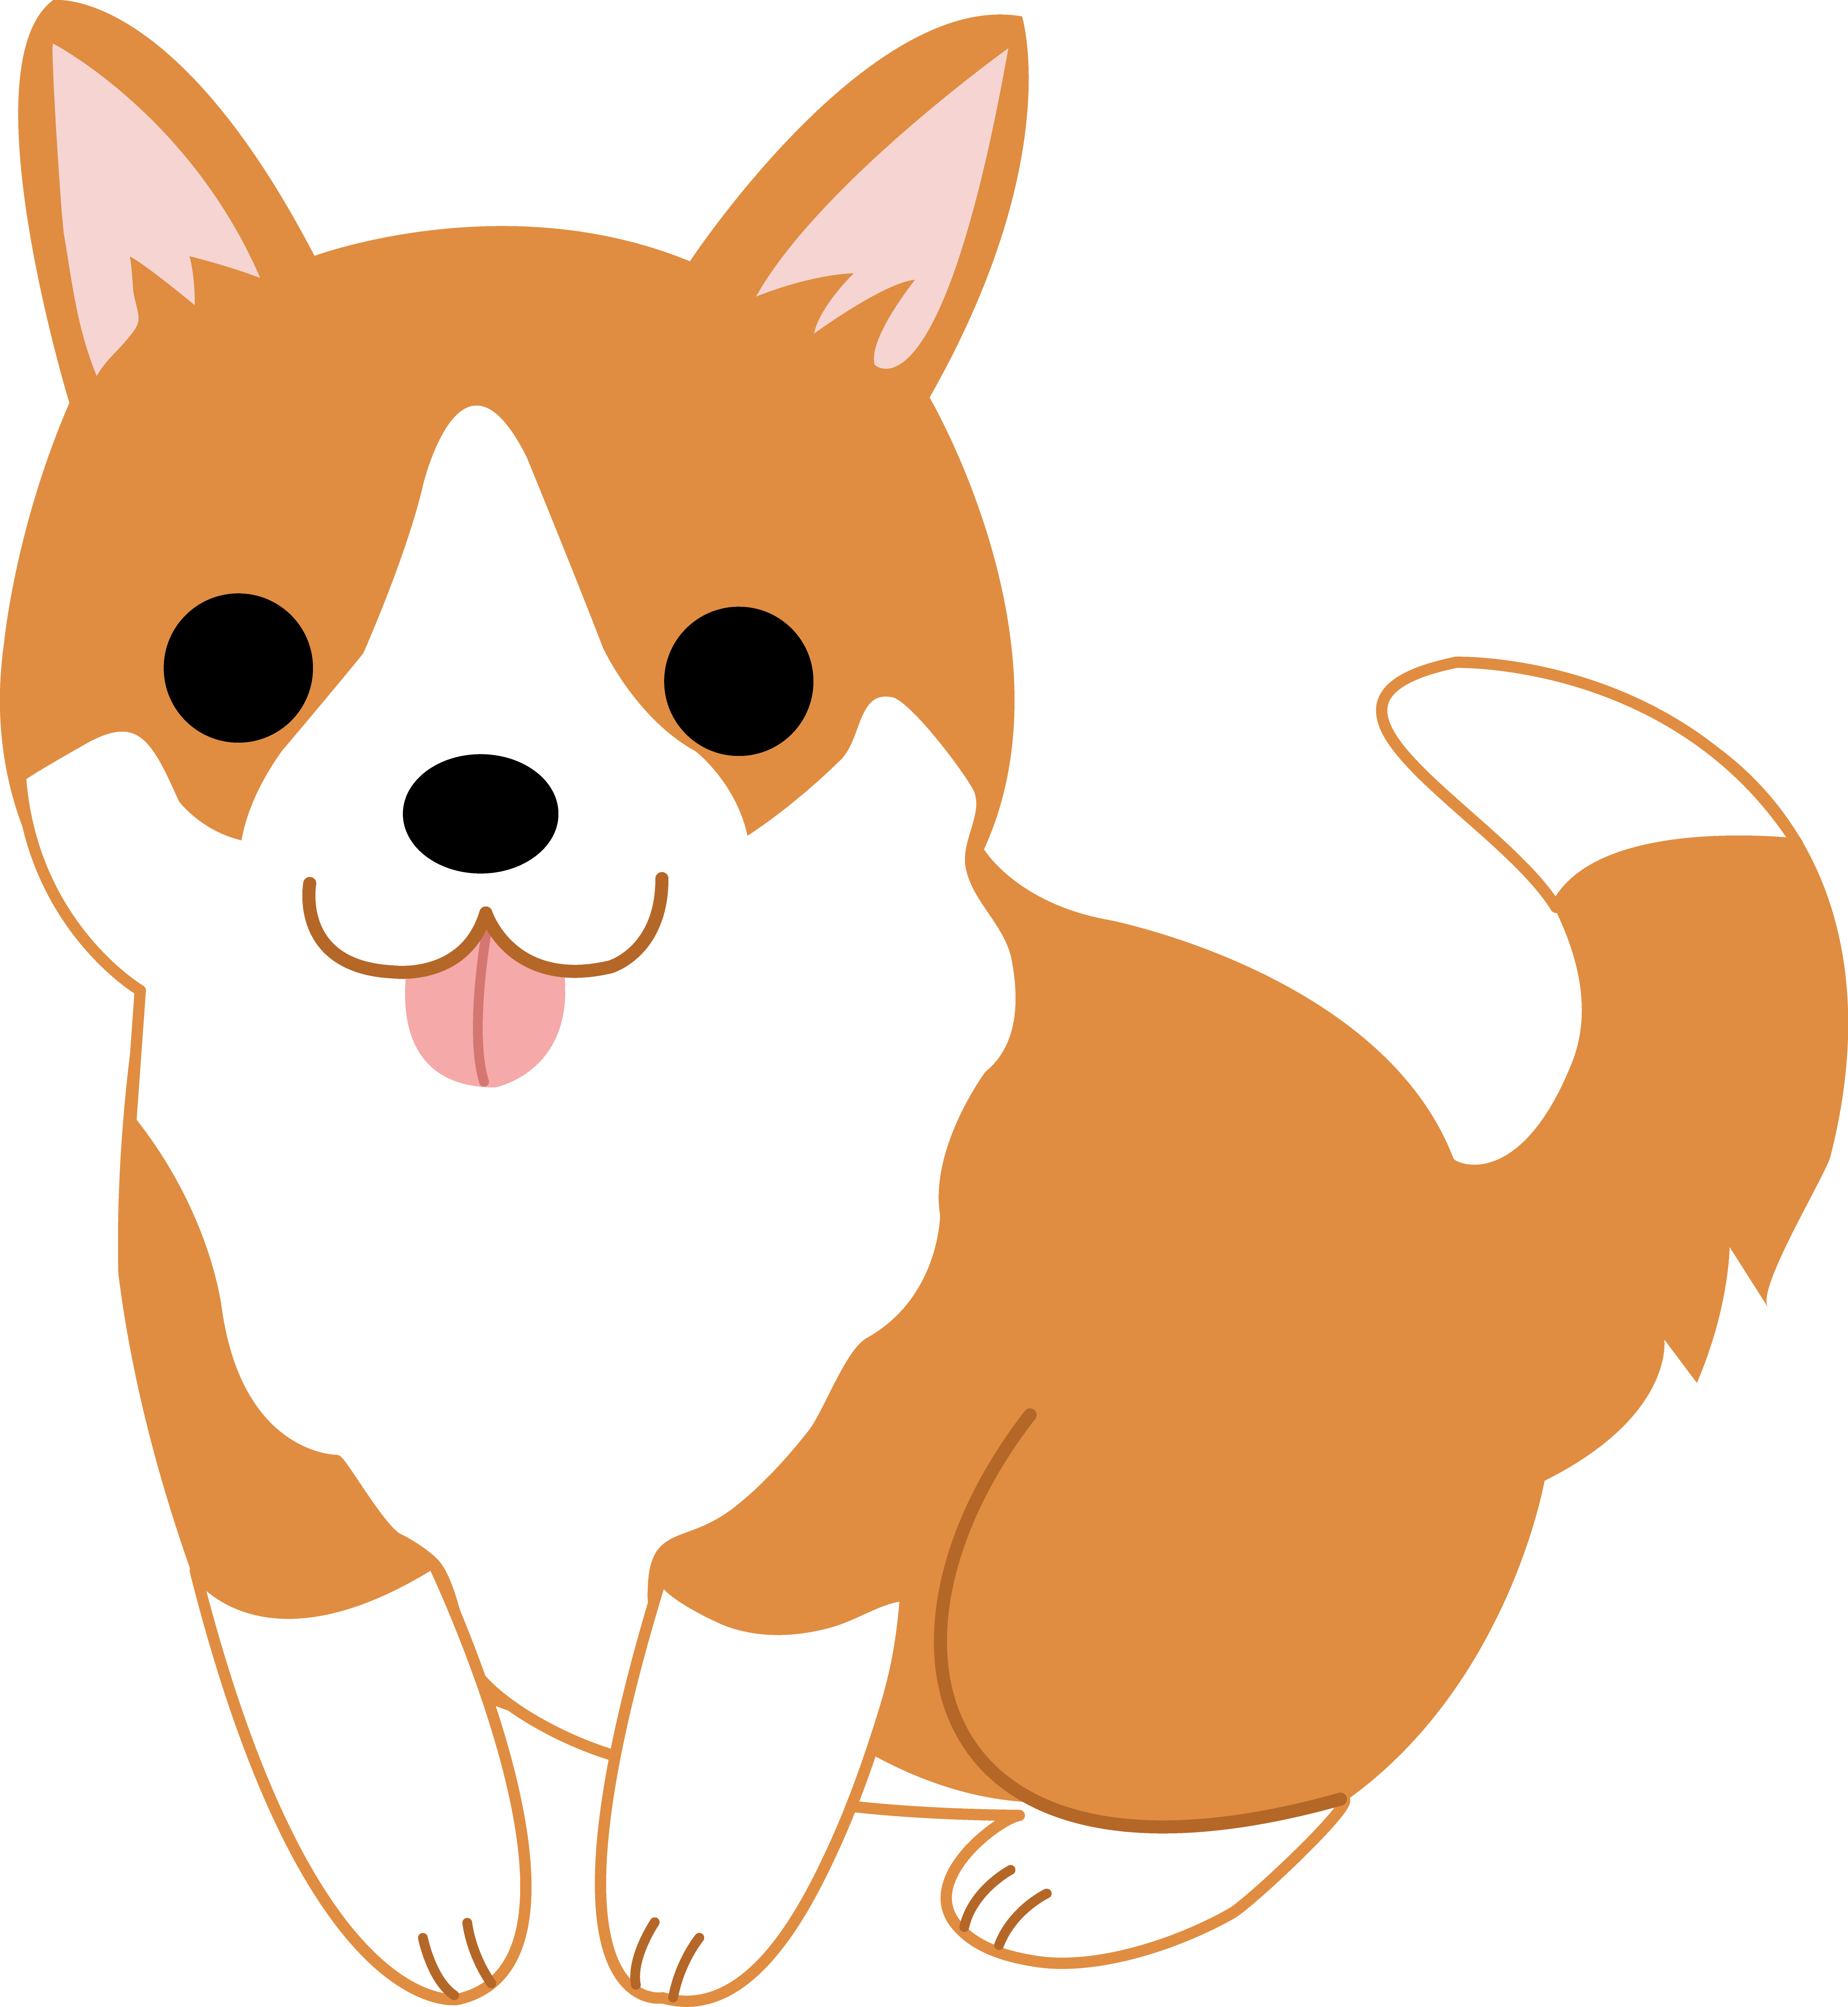 Free Cute Cartoon Dogs Pictures, Download Free Cute Cartoon Dogs Pictures png images, Free